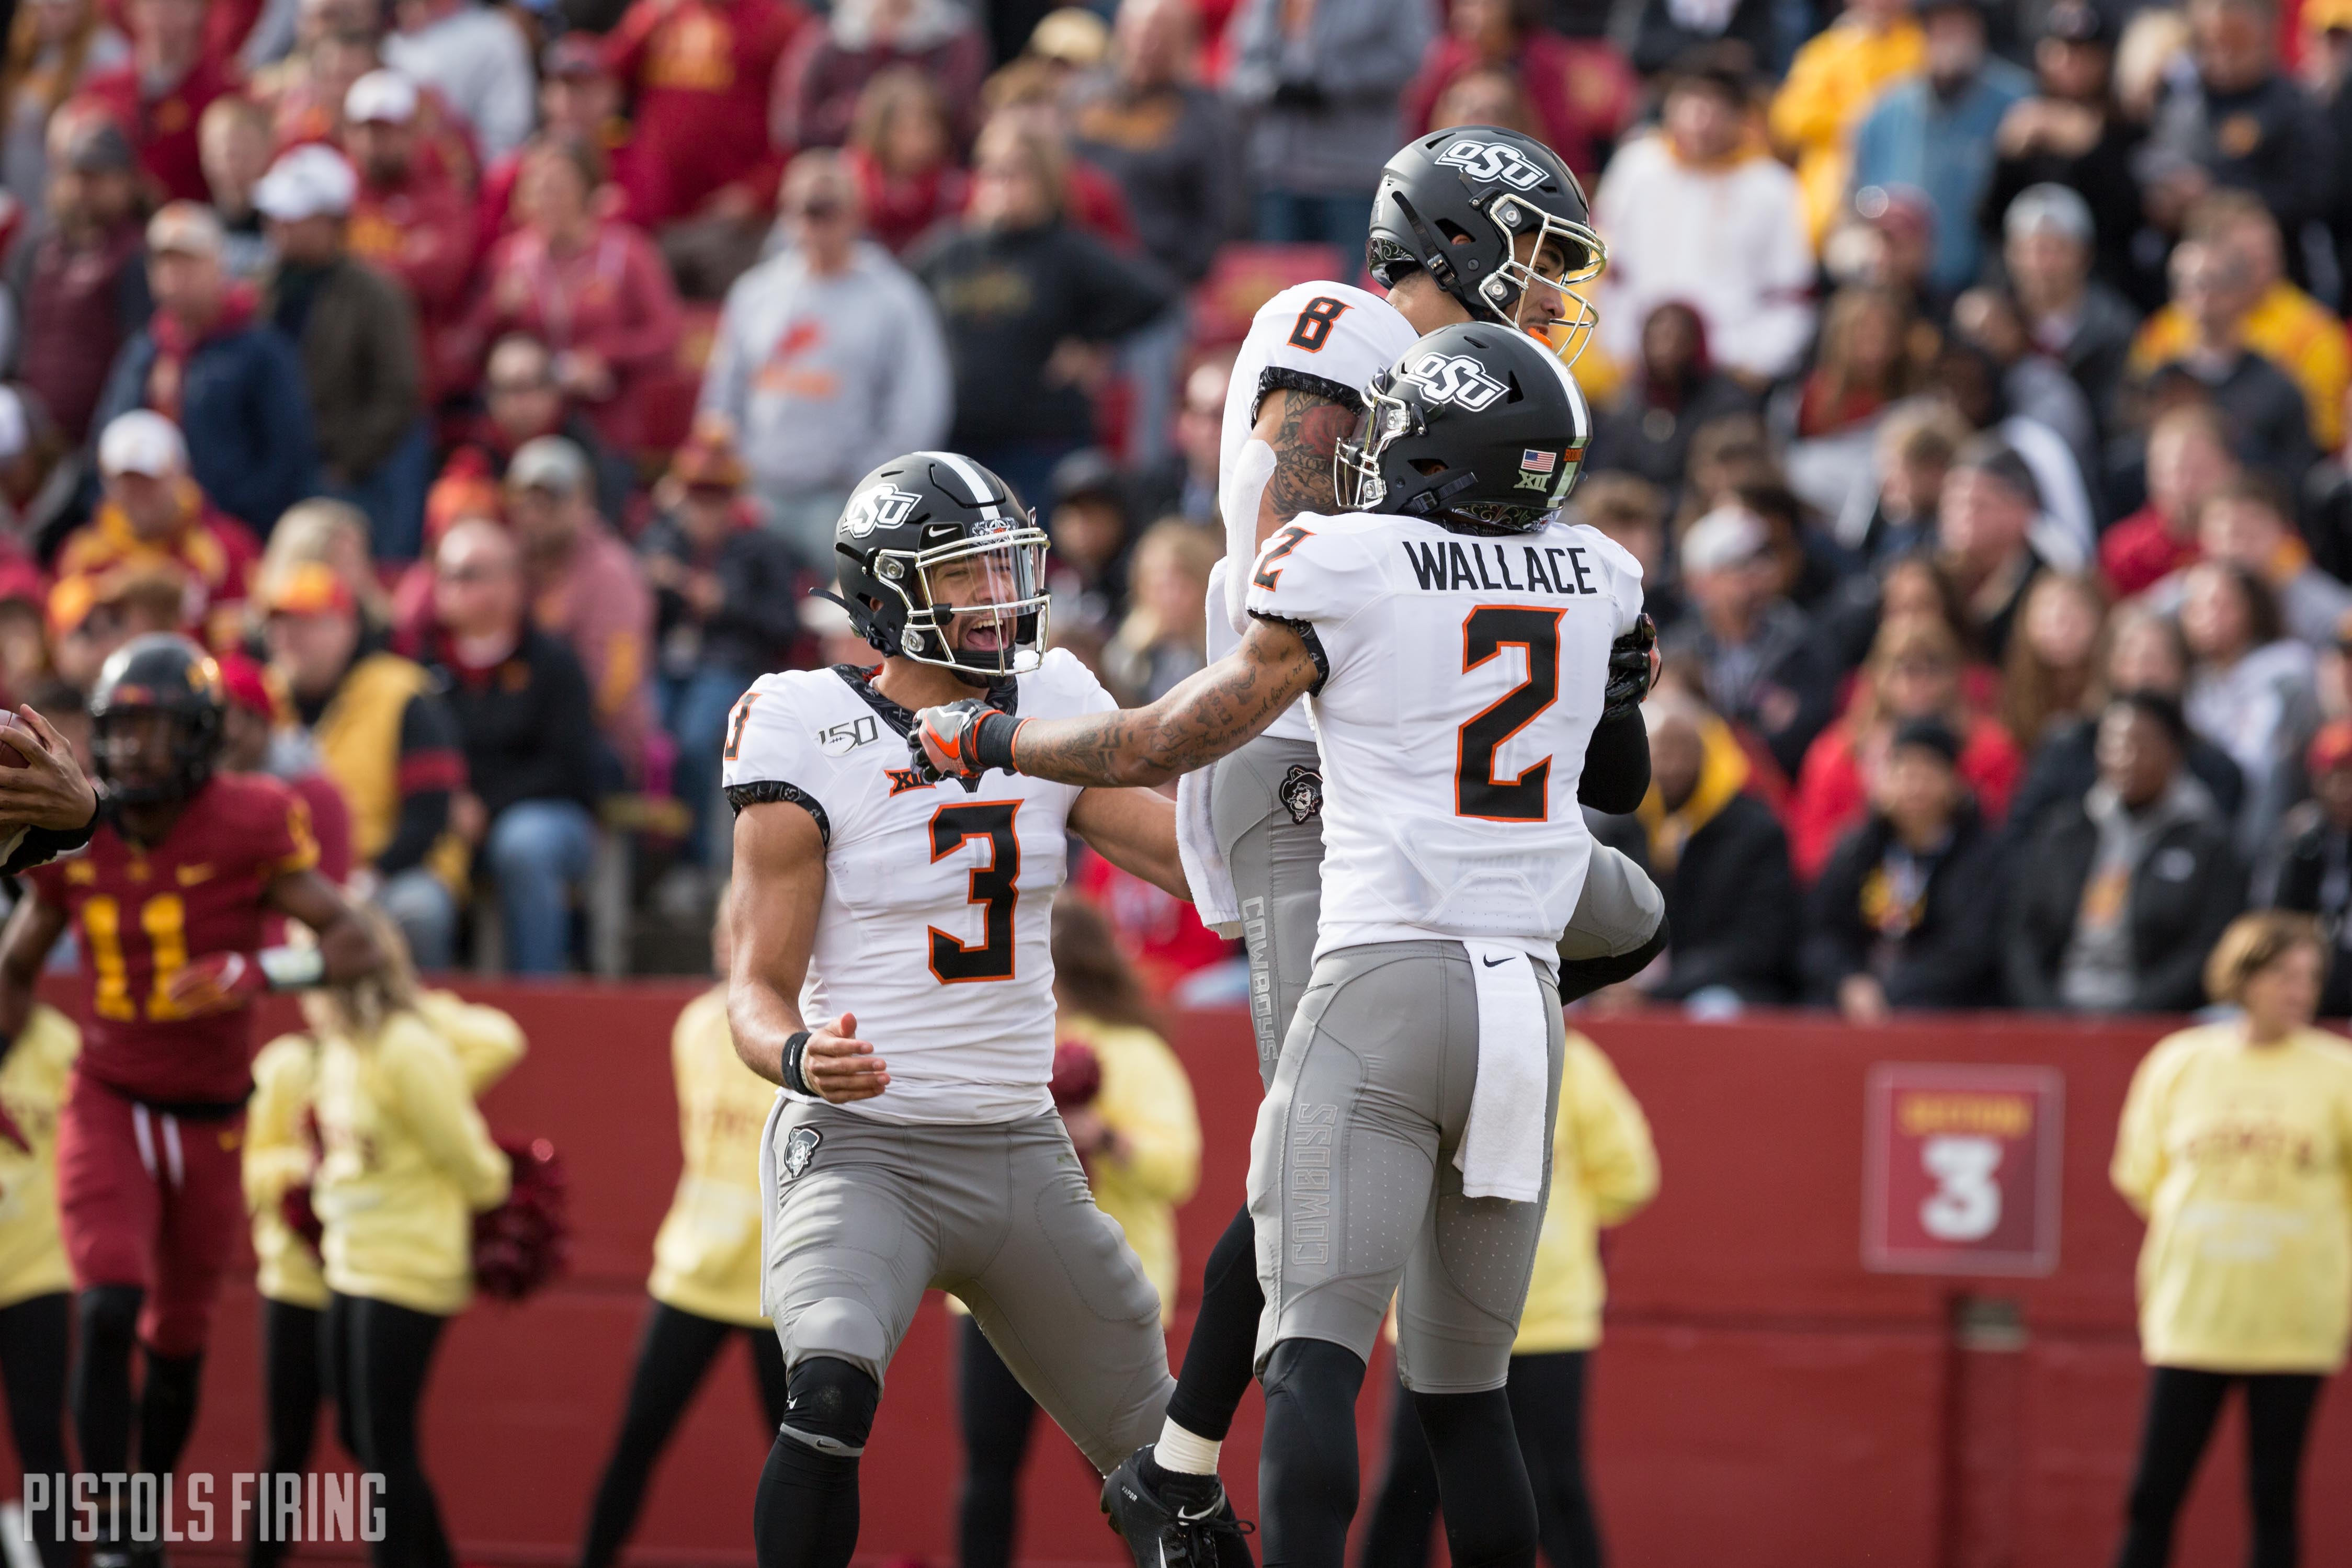 Oklahoma State vs. Iowa State The Best Photos from OSU's Road Win